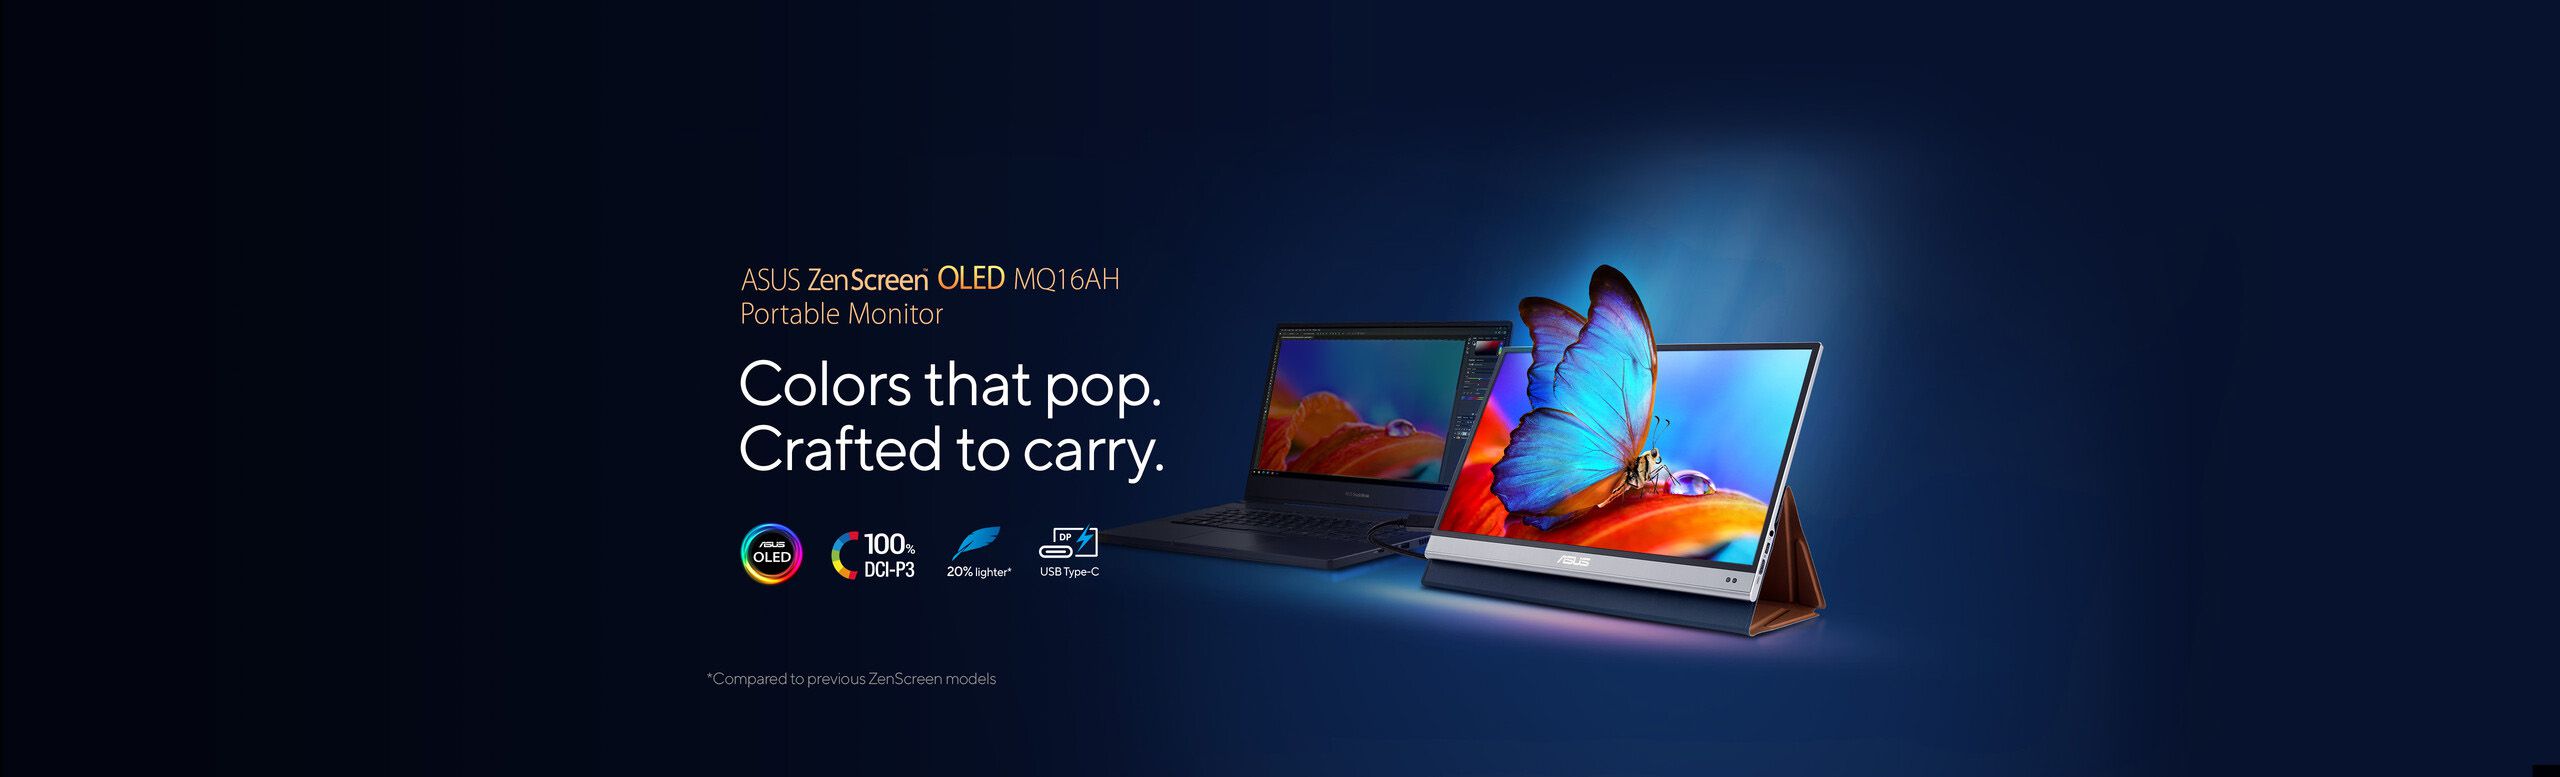 ASUS ZenScreen OLED MQ16AH Colors that pop.  Crafted to carry.